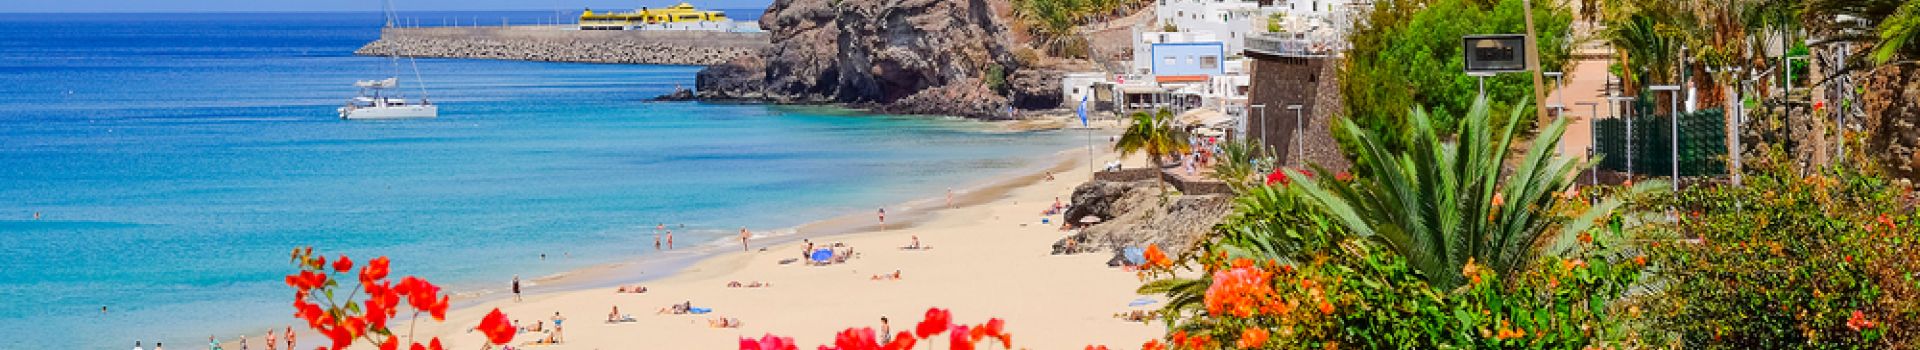 Cheap holidays to Fuerteventura with Cassidy Travel